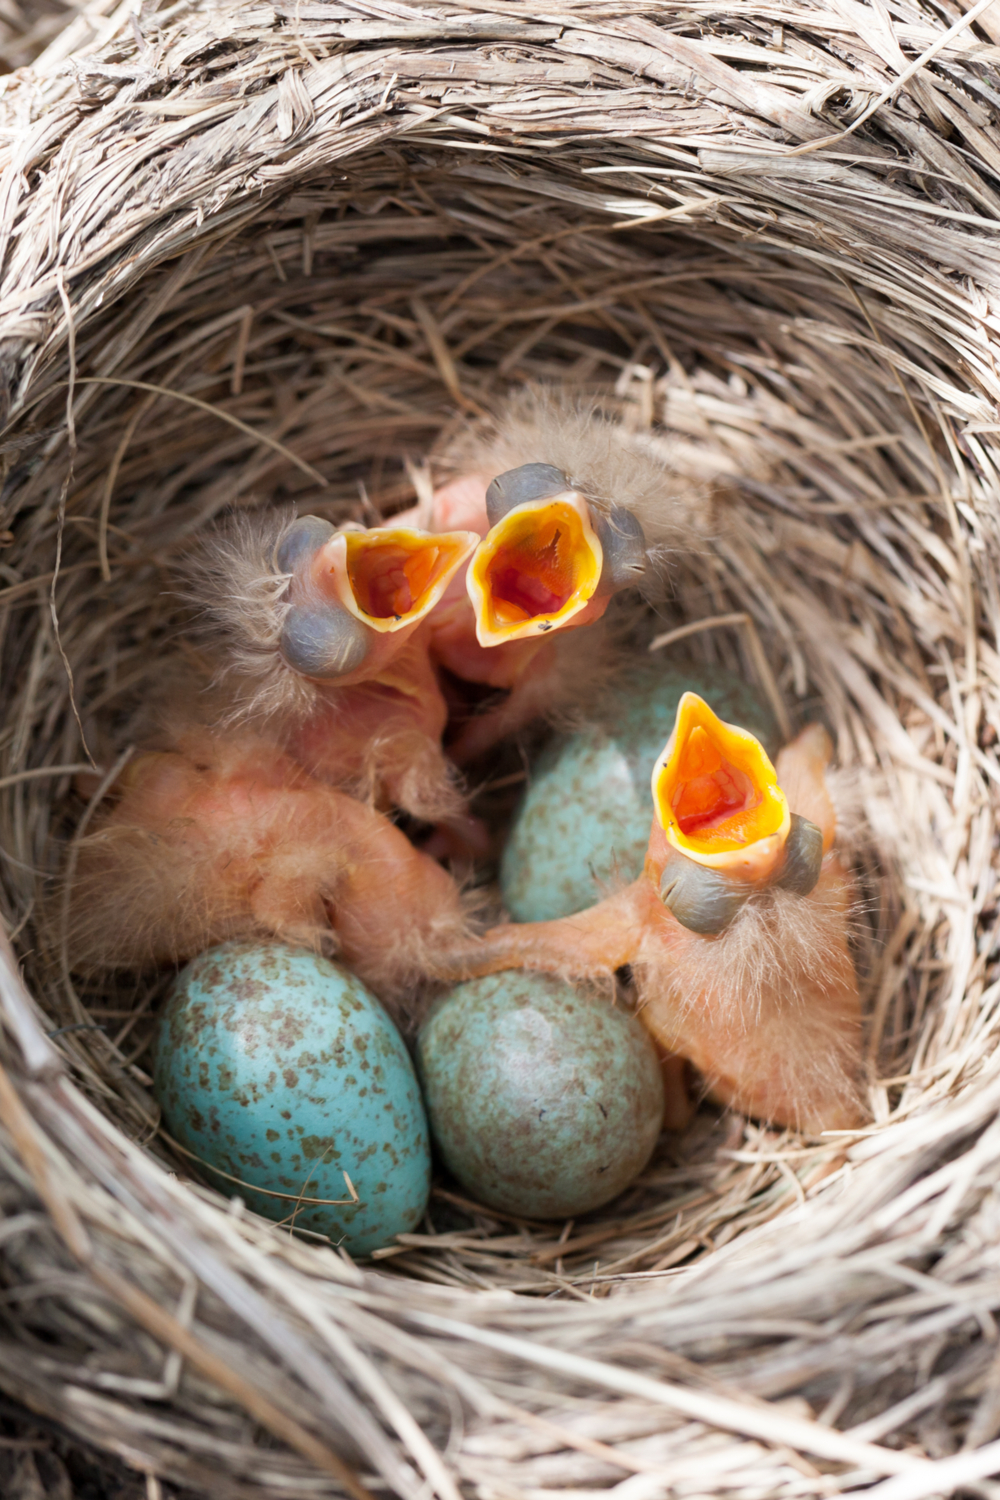 An introduction to parental care in birds